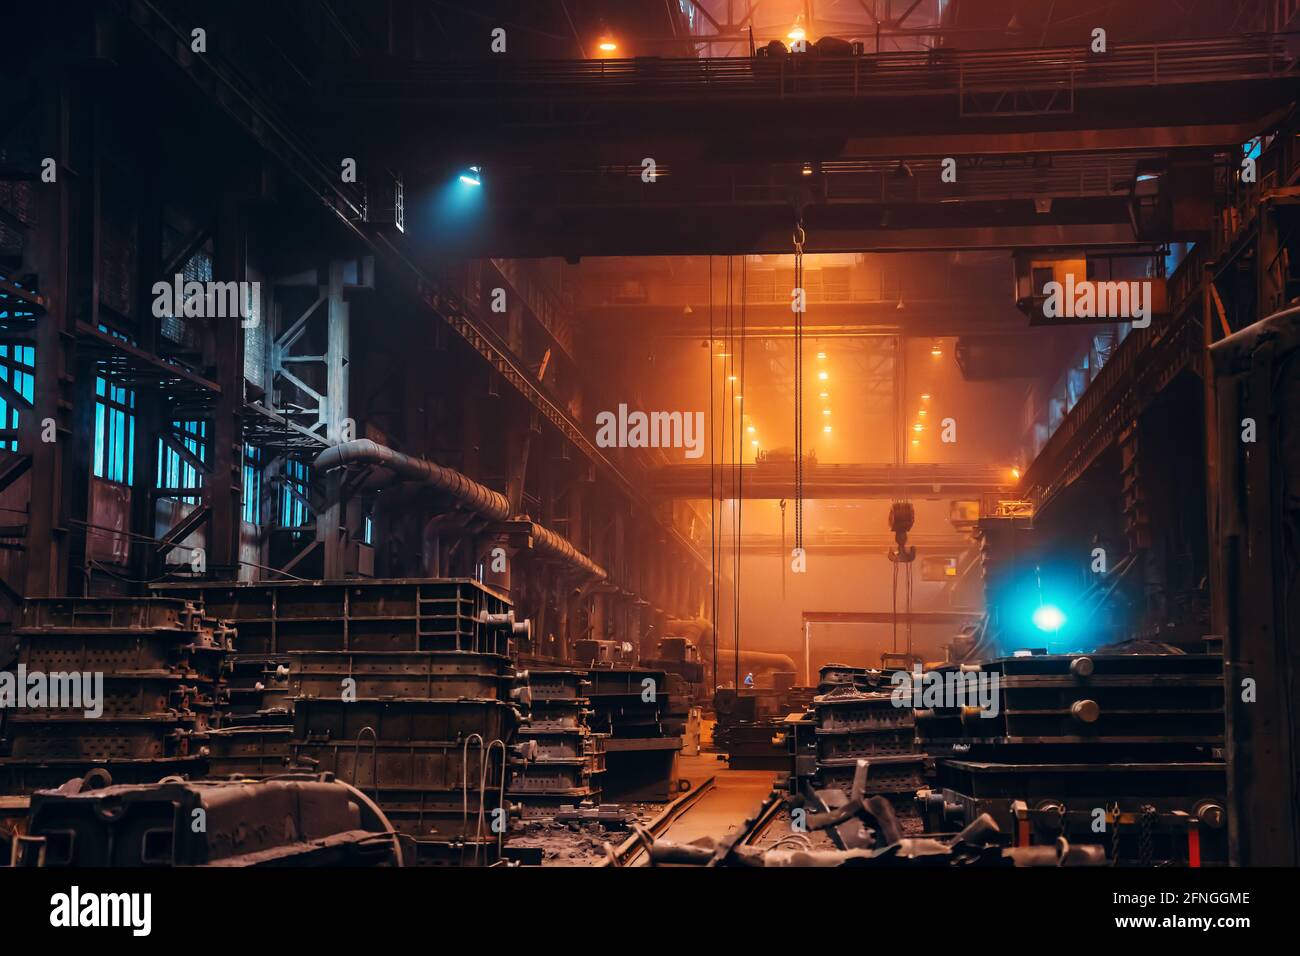 Metallurgical plant. Industrial steel production. Interior of metallurgical workshop inside. Steel mill factory. Heavy industry foundry. Stock Photo